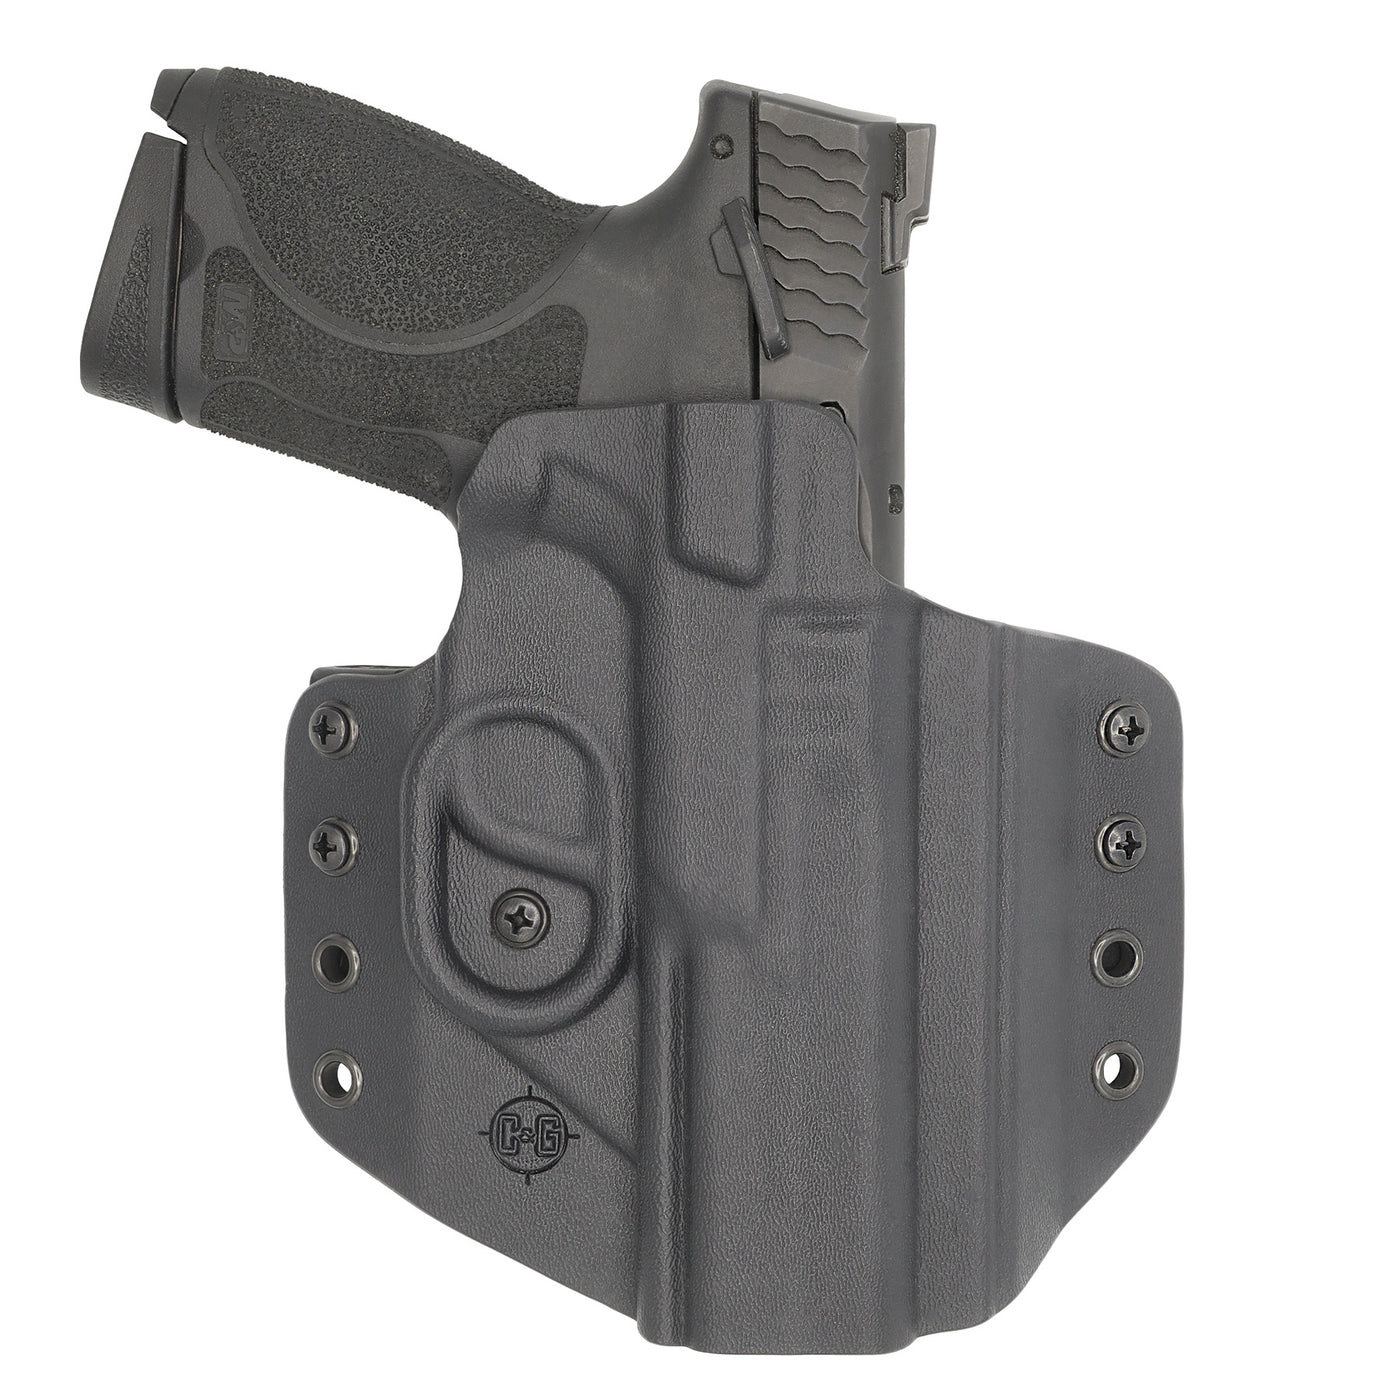 C&G Holsters quickship OWB Covert S&W M&P 10/45 4.6" in holstered position